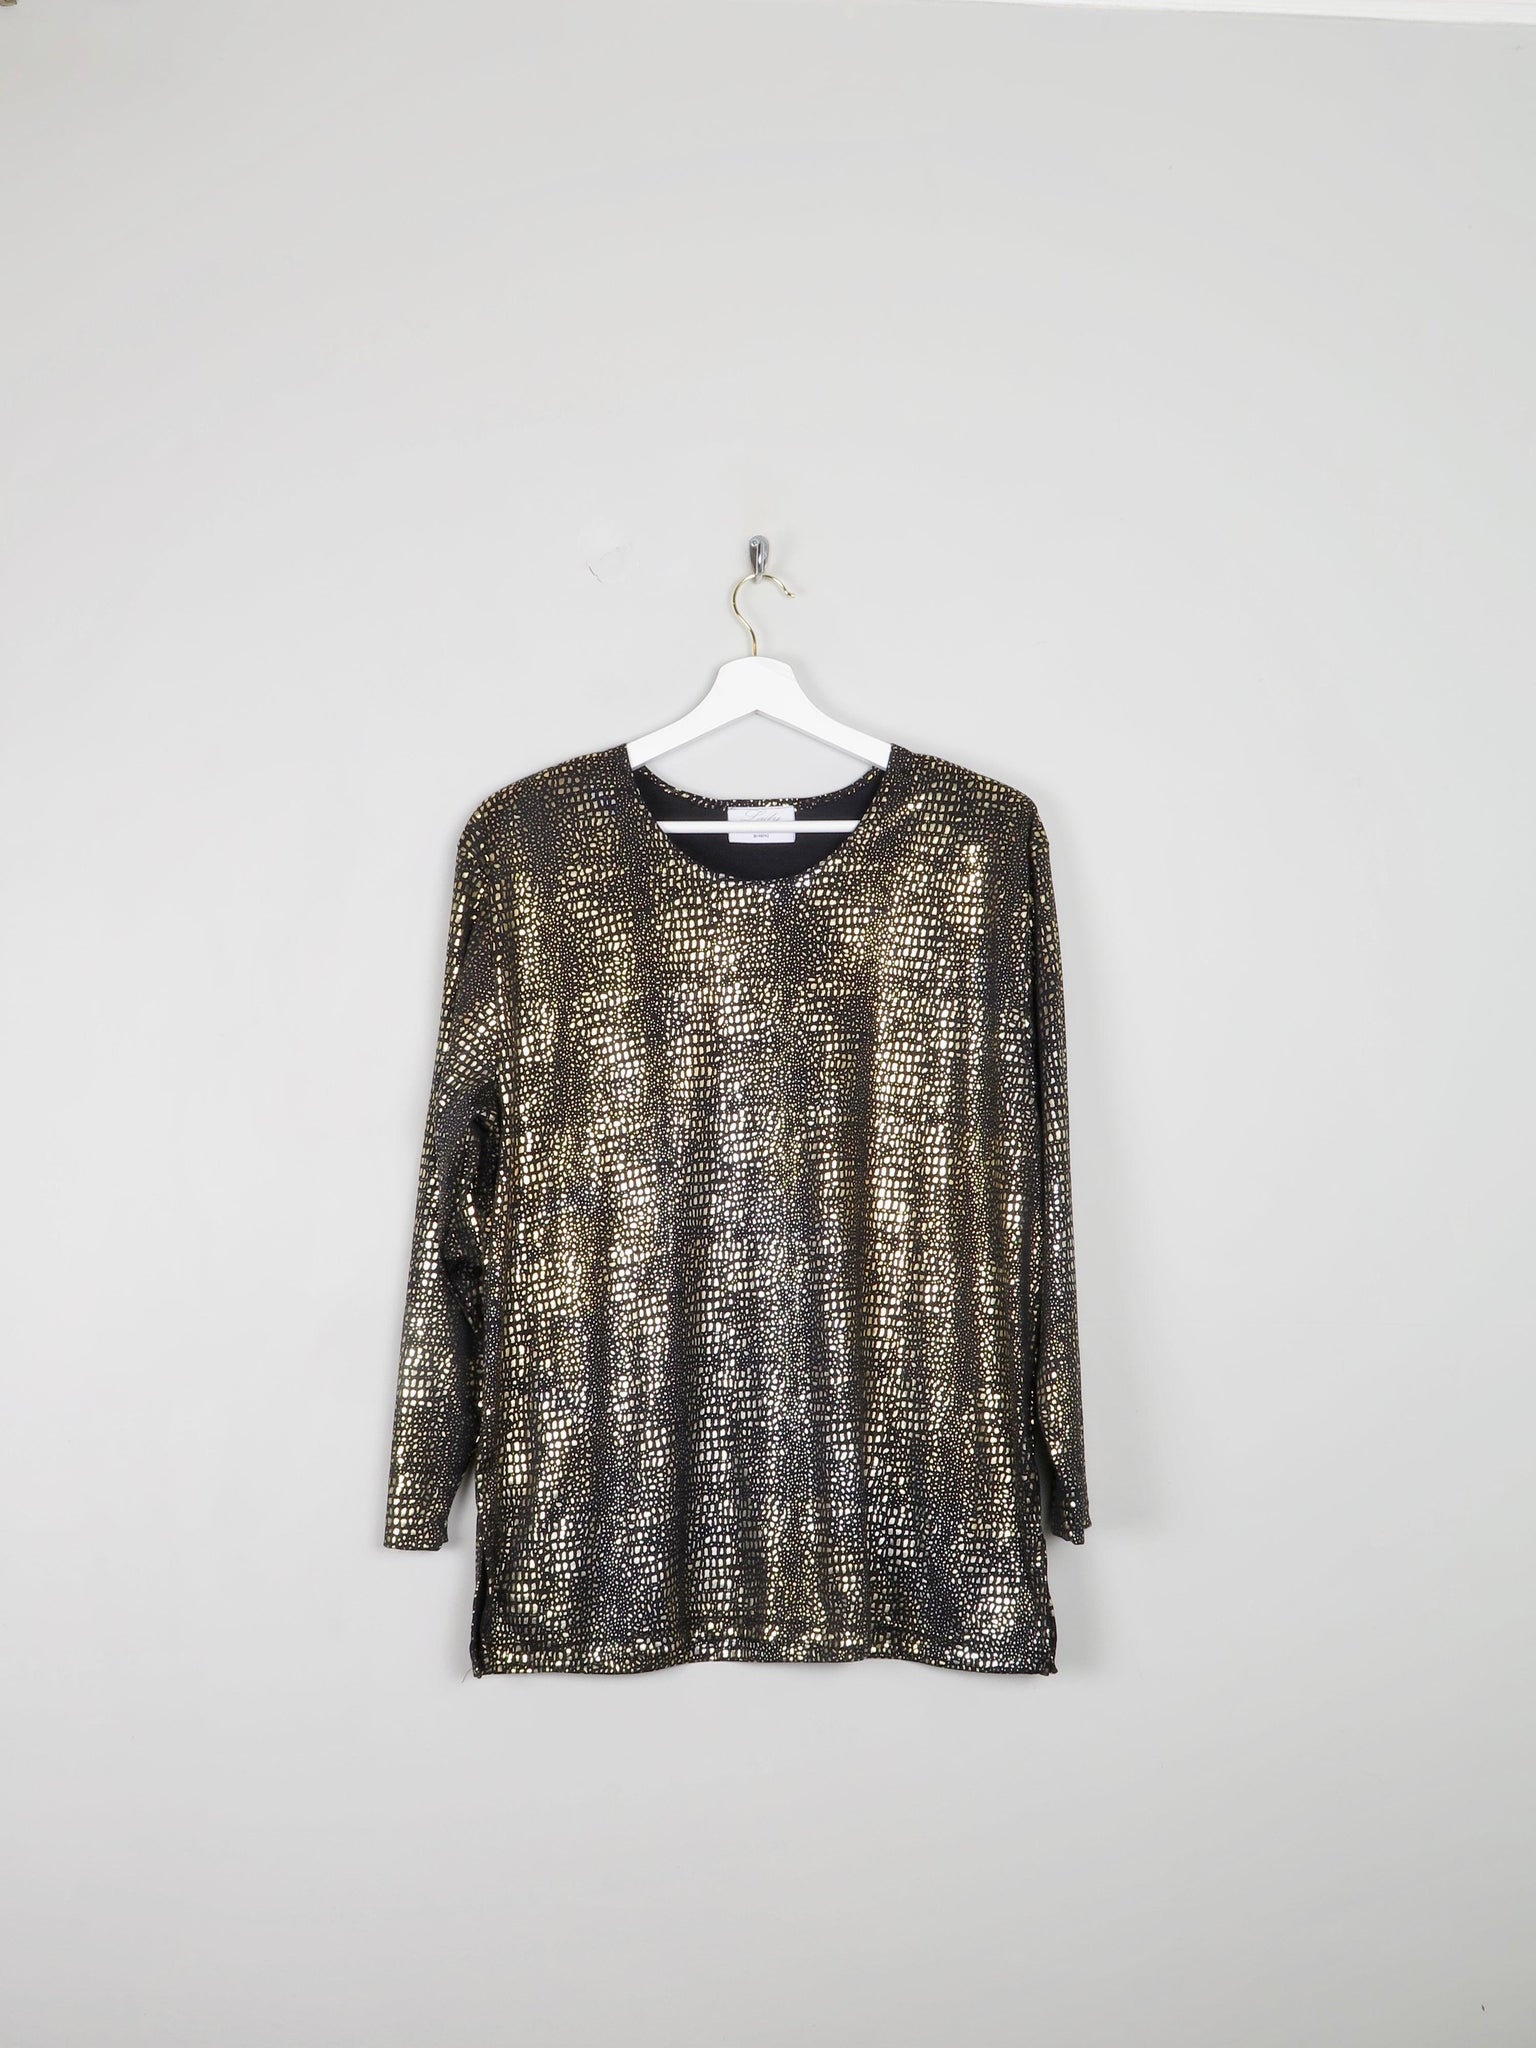 Gold Lame Long Sleeved Top L/XL - The Harlequin